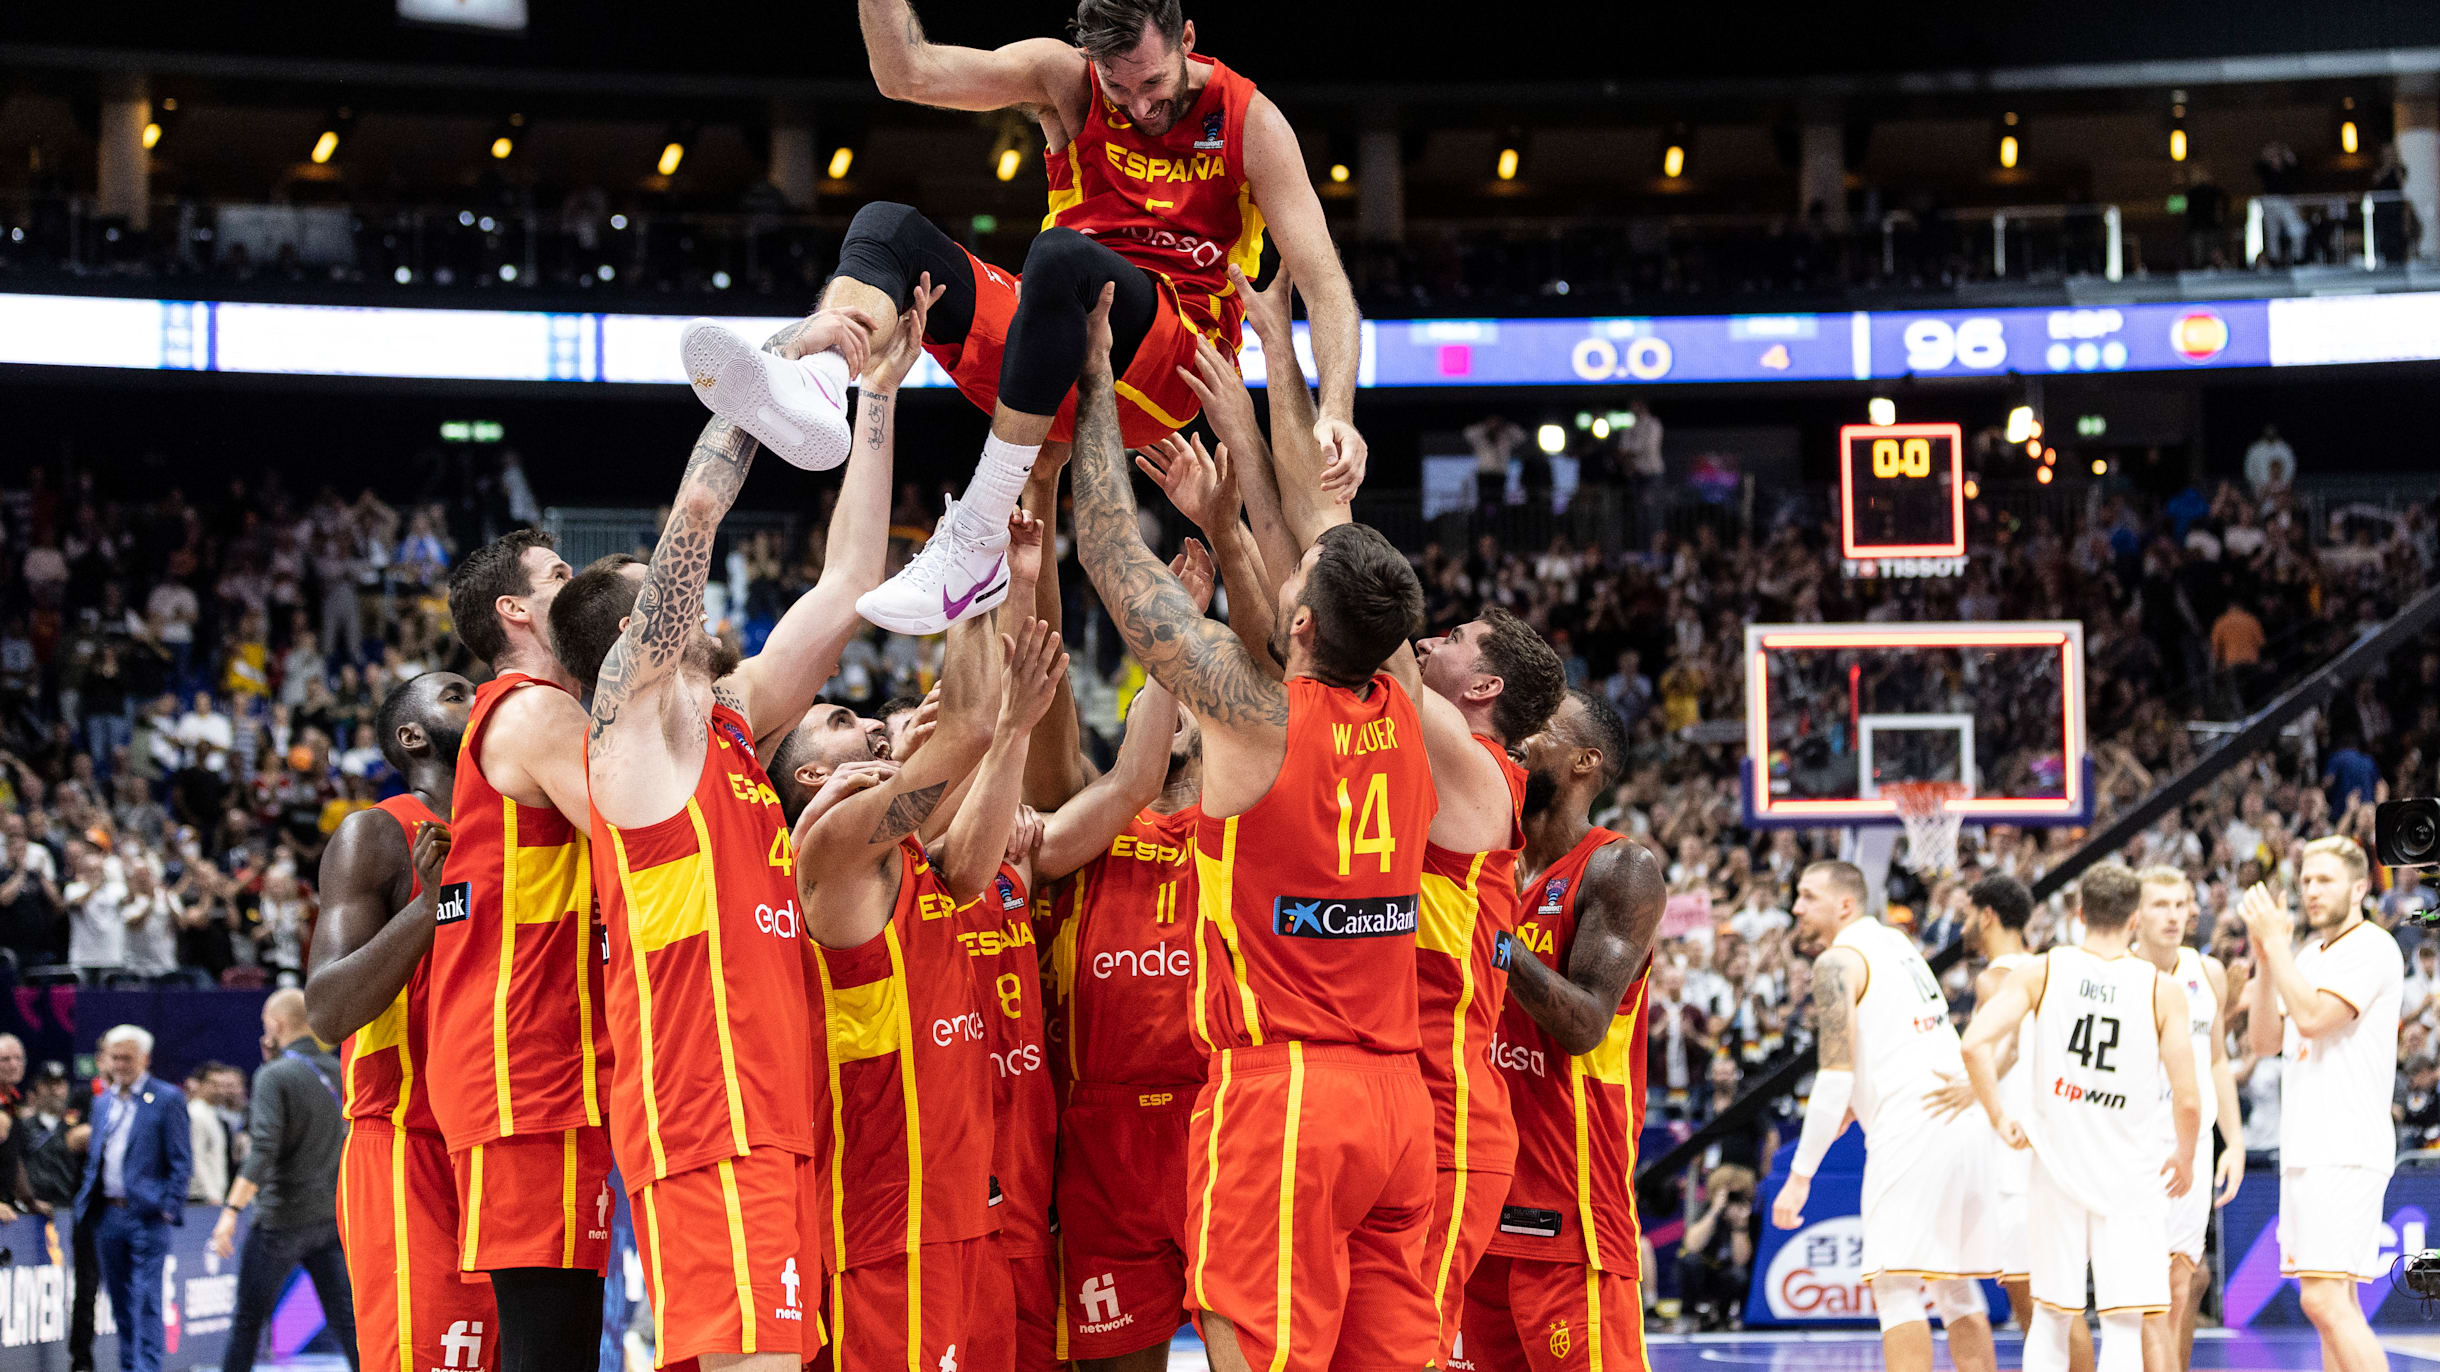 EuroBasket 2022 Final Preview, schedule, and how to watch NBA stars for Spain and France